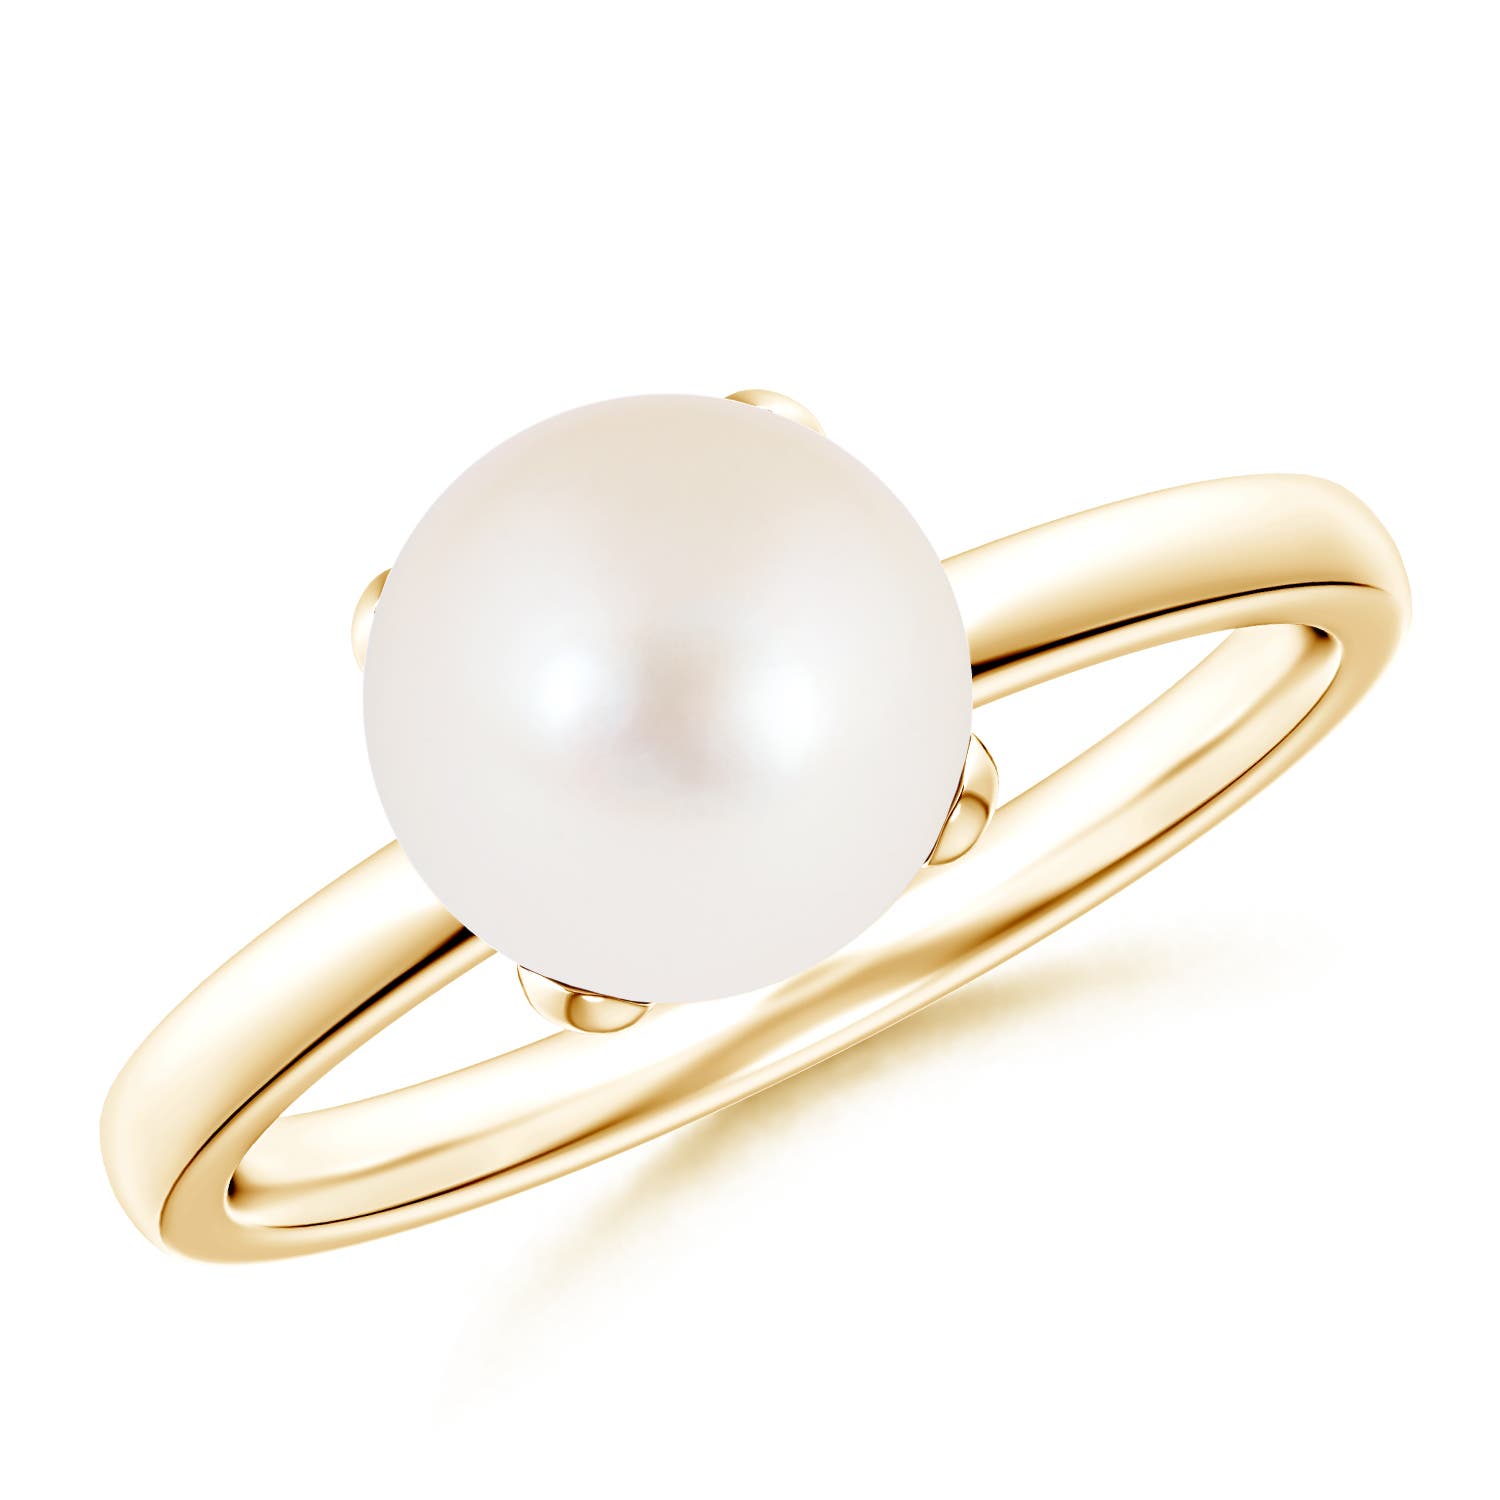 Buy Simple Pearl Ring 14K Gold Ring Simple Engagement Ring Single Pearl  Dainty Gold Ring Thin Rose Gold Ring Online in India - Etsy